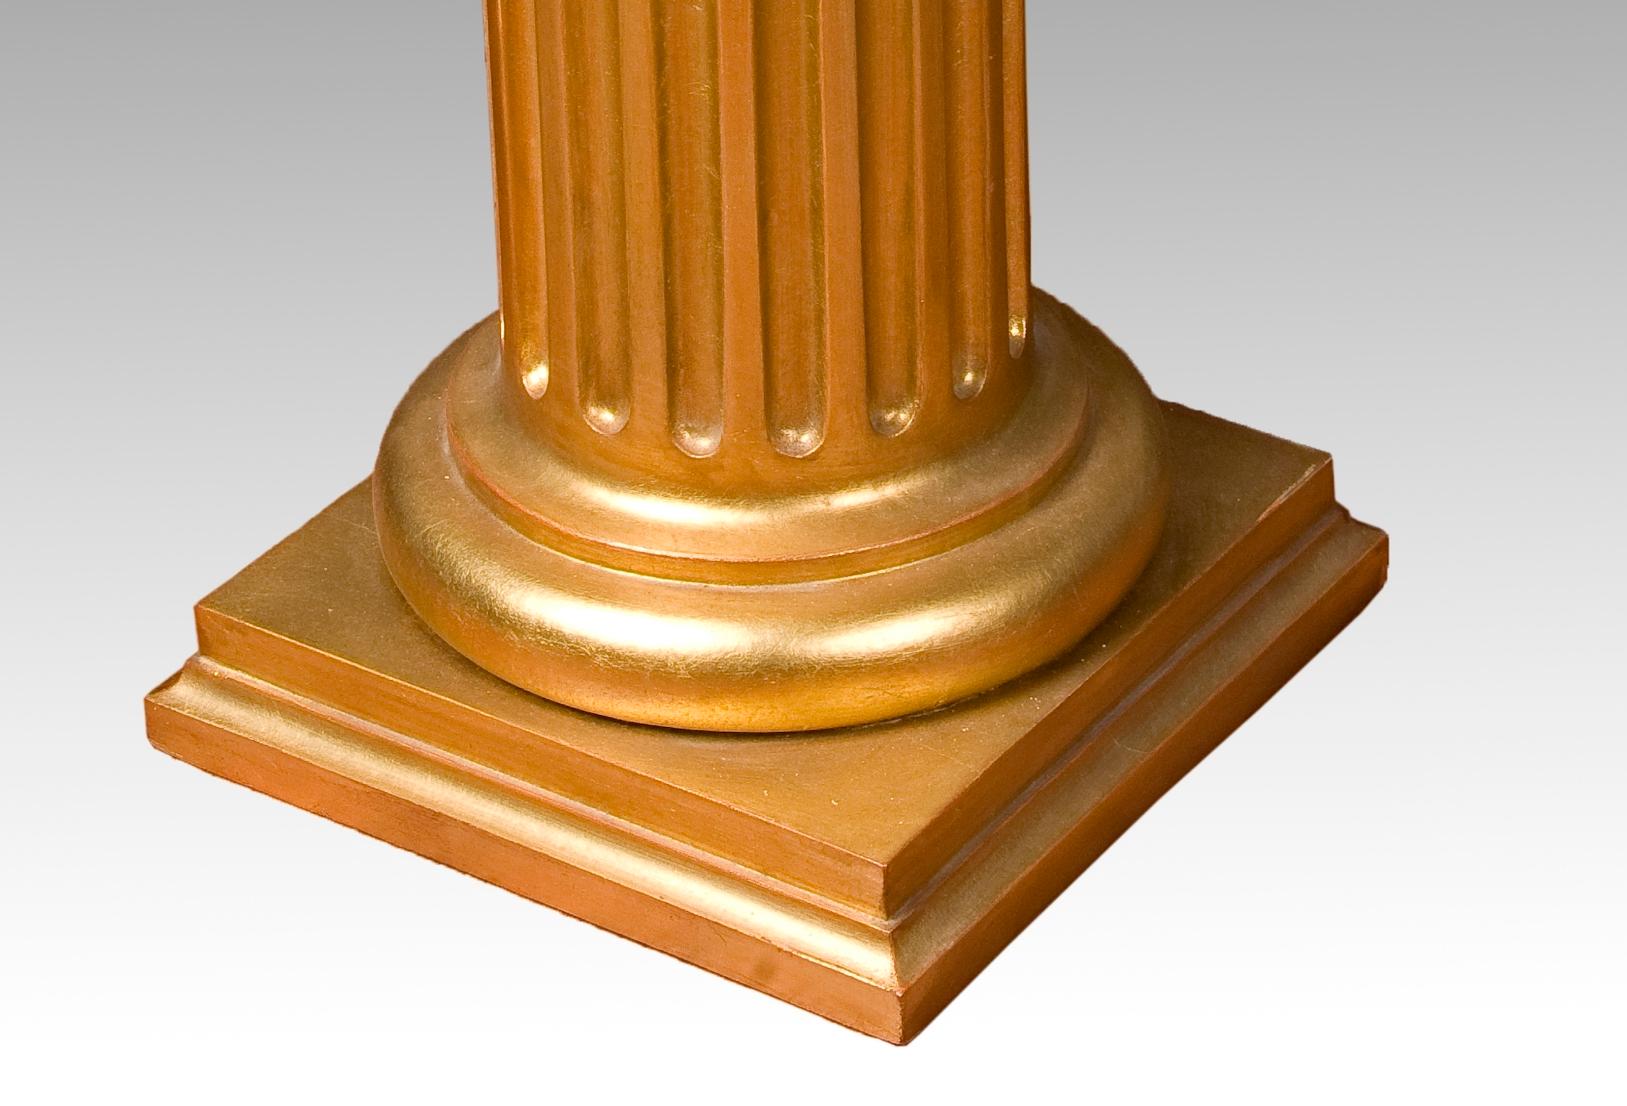 Neoclassical Revival Column-shaped base. Gilded wood. 20th century. For Sale